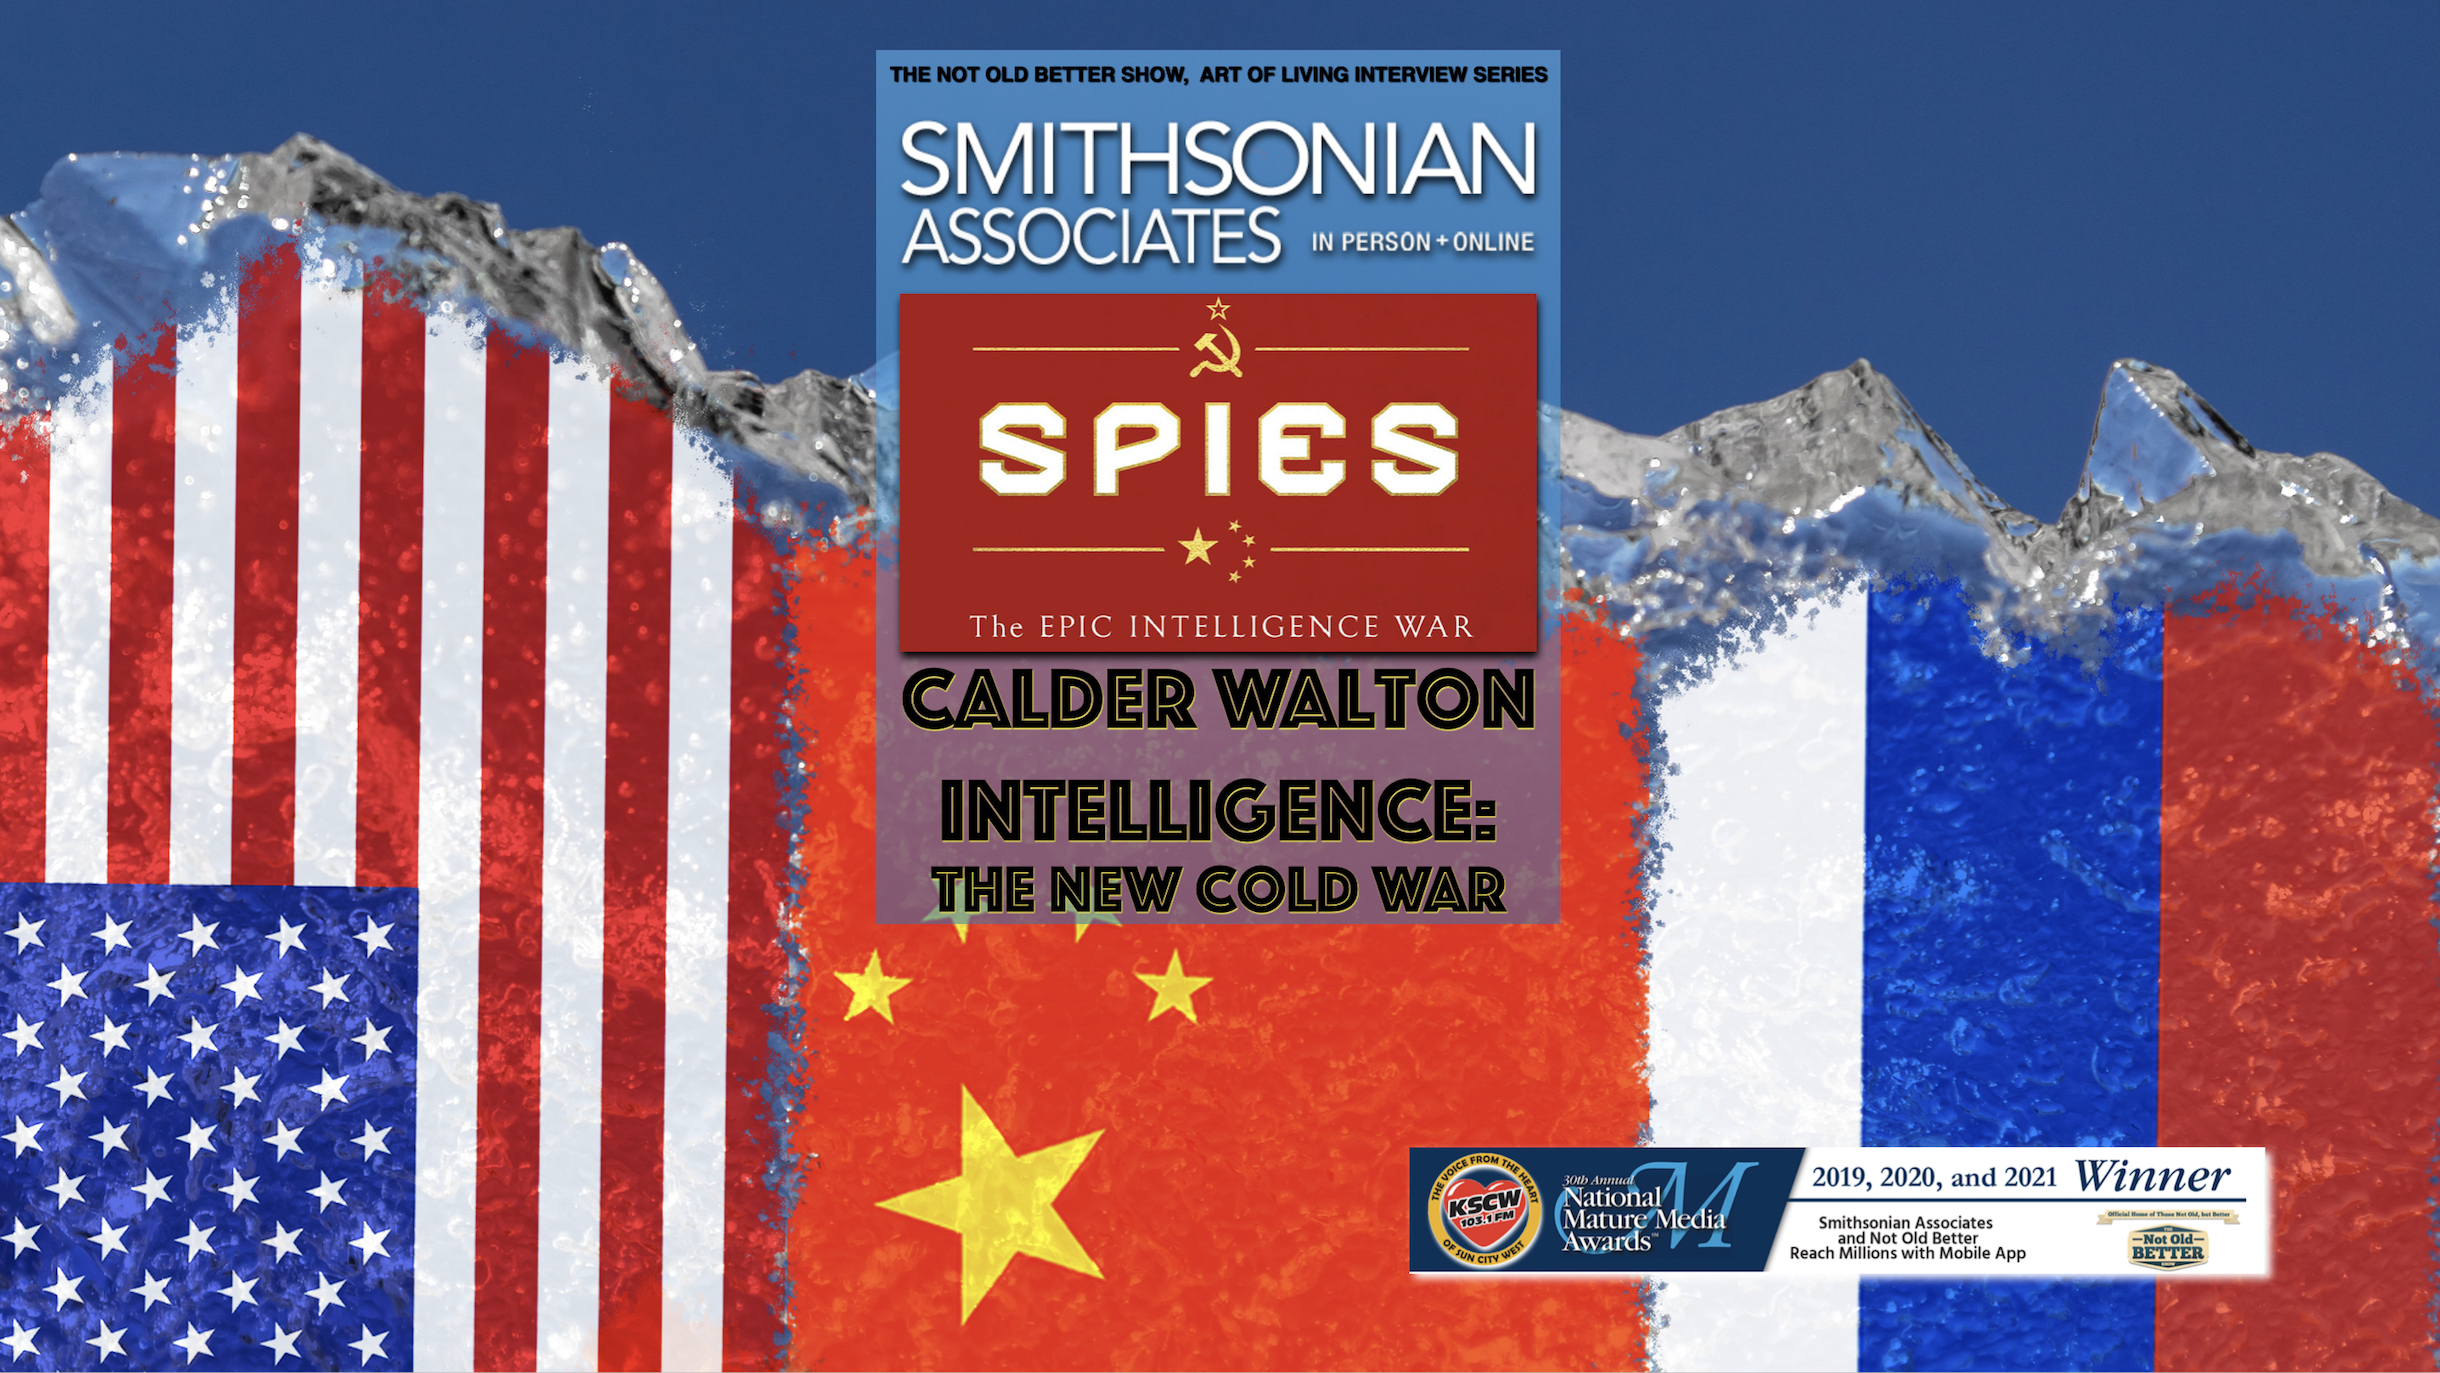 Inside ‘SPIES’: Smithsonian Associate Calder Walton on Intelligence Warfare and U.S.-Russia and China Relations